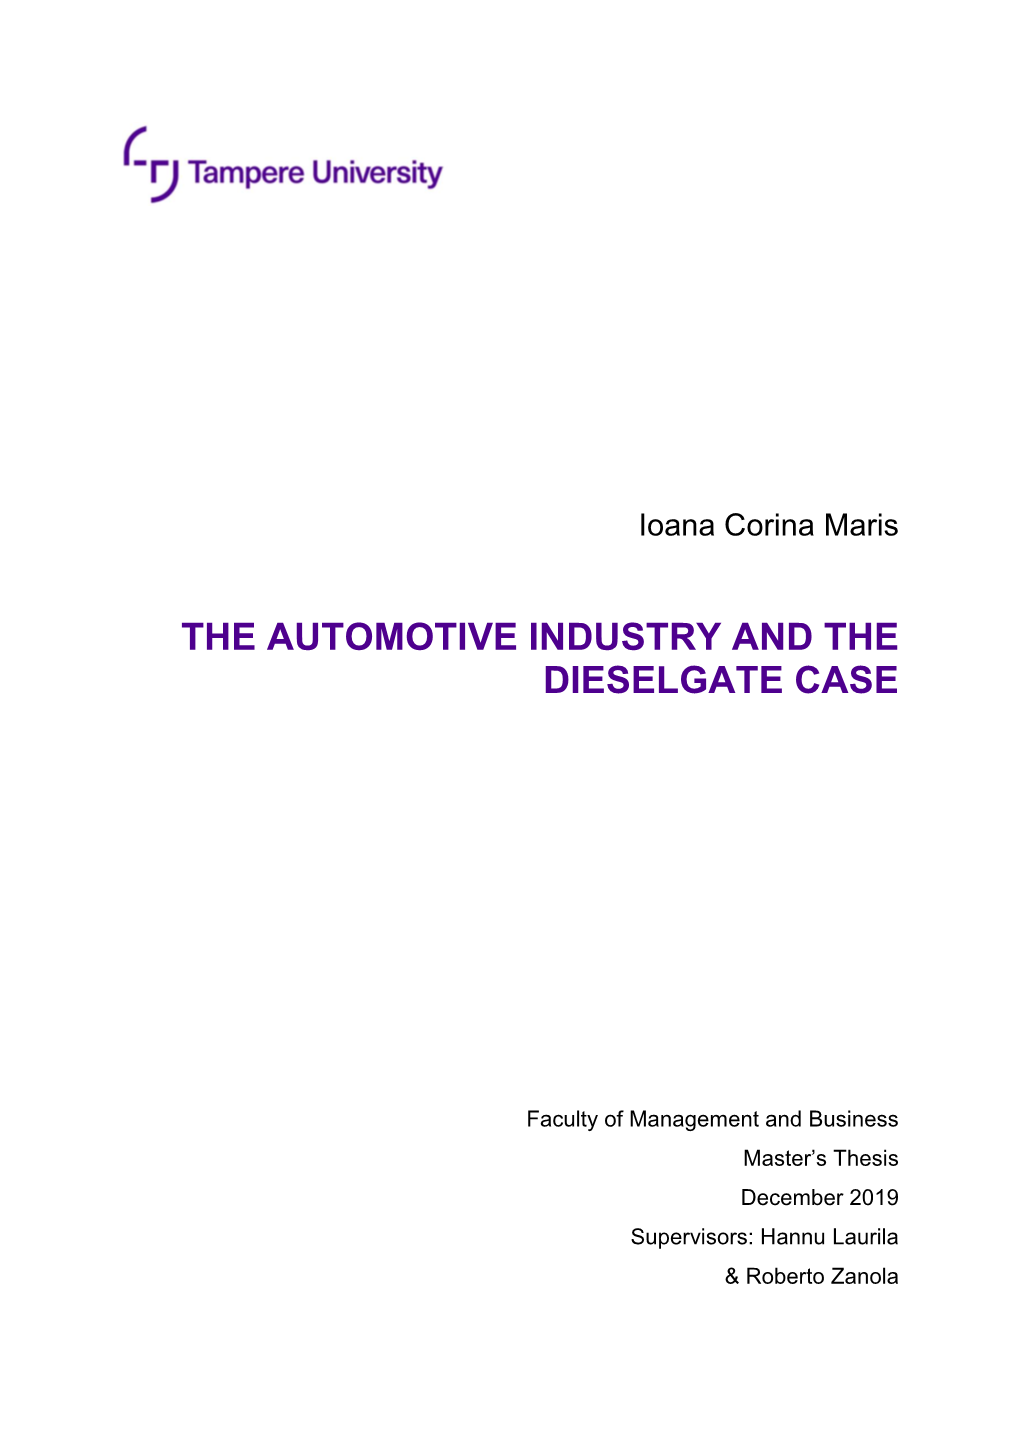 The Automotive Industry and the Dieselgate Case